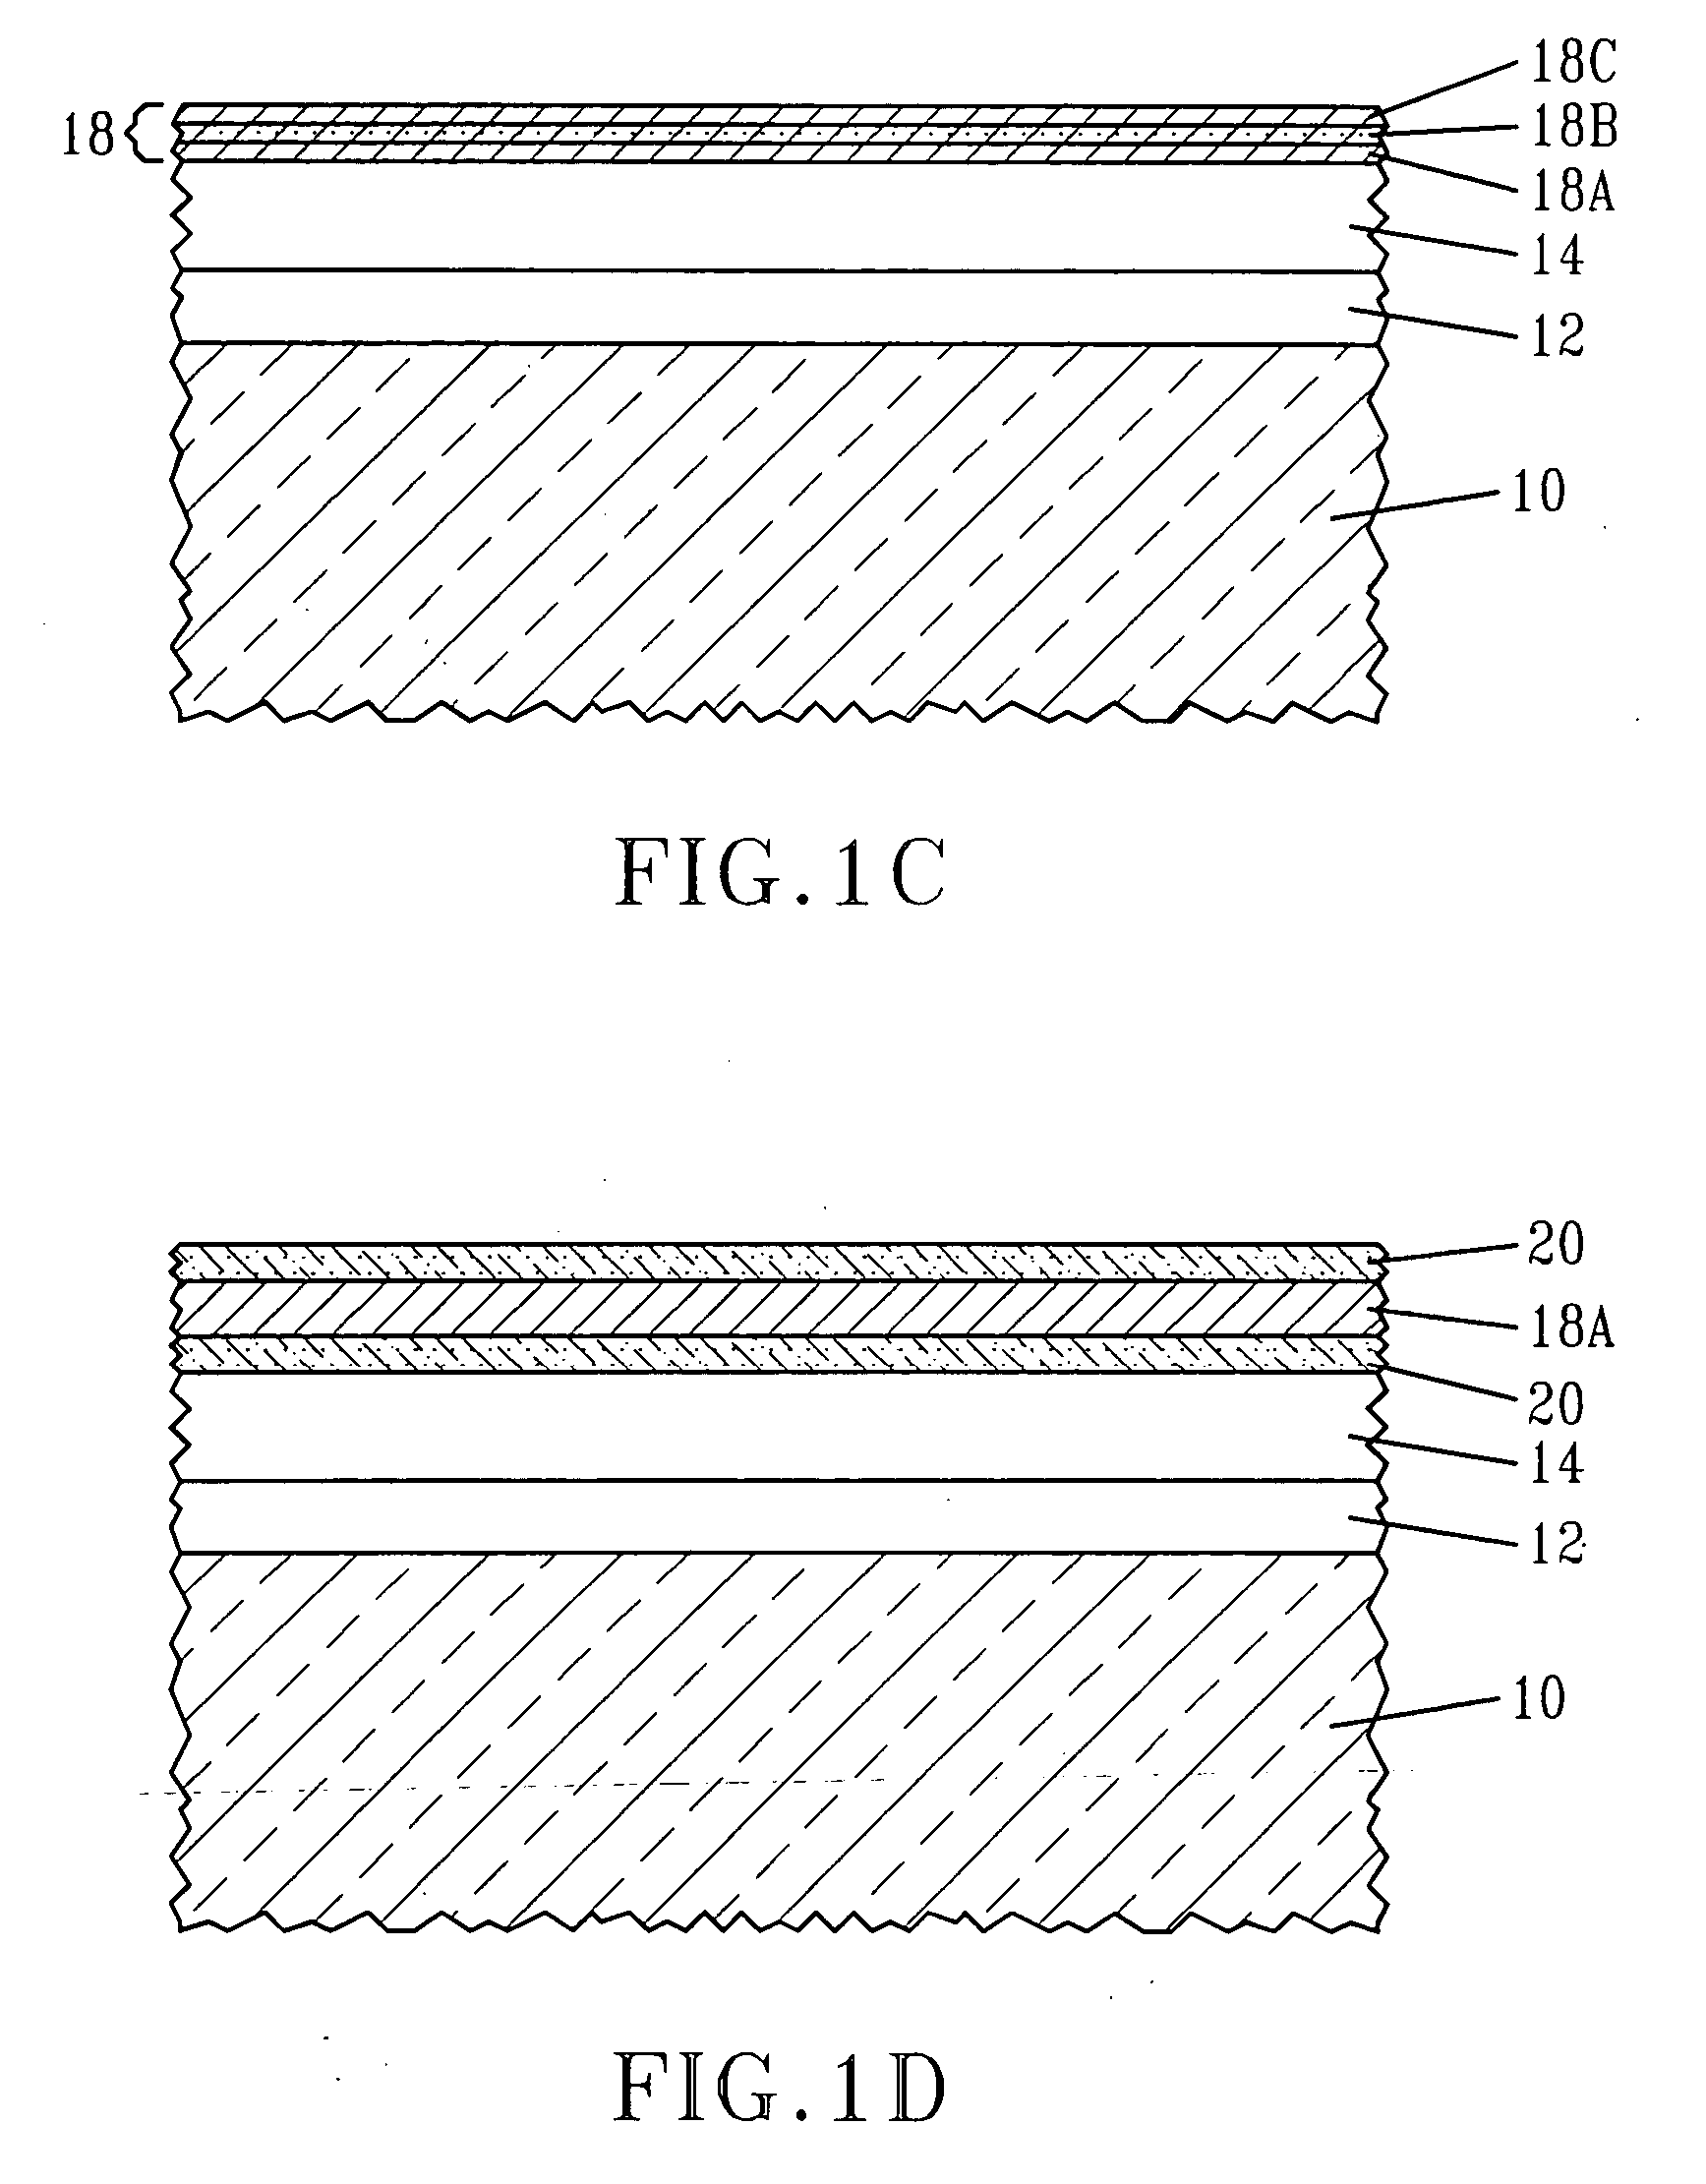 Introduction of metal impurity to change workfunction of conductive electrodes